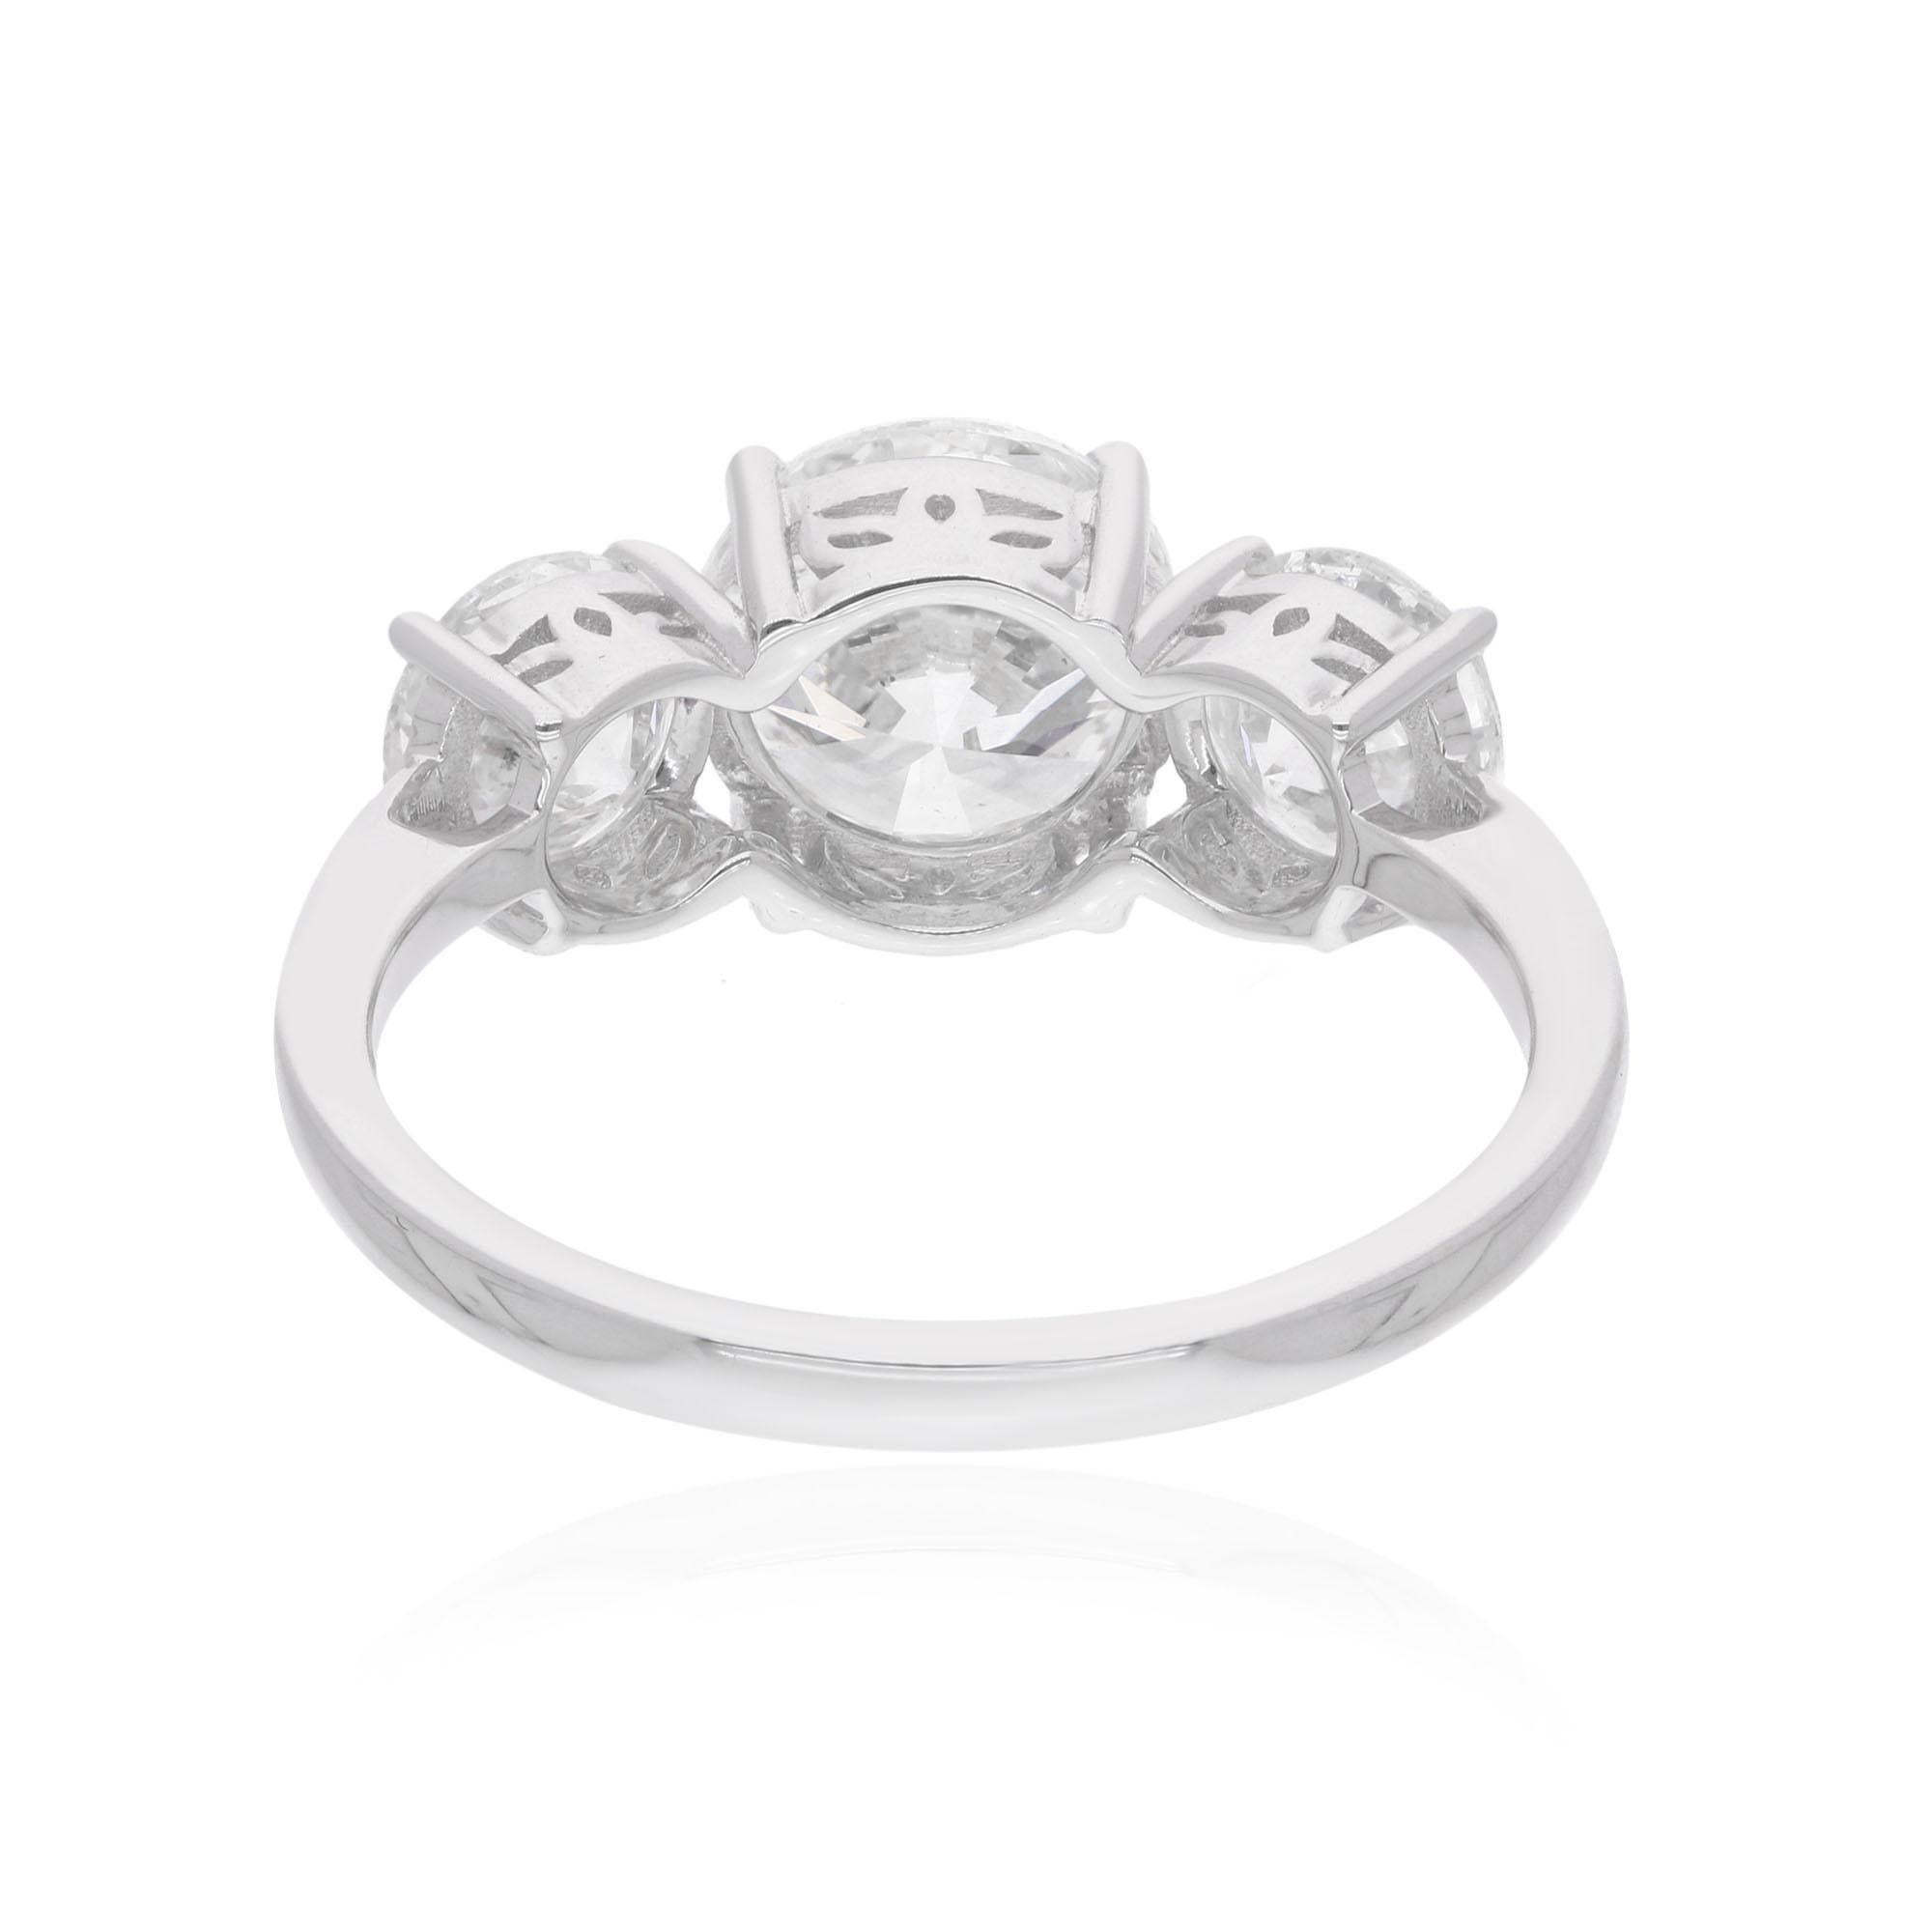 The centerpiece of this ring is a stunning round diamond, flanked by two smaller round diamonds on either side, creating a captivating display of brilliance and sparkle. Each diamond is meticulously selected for its exceptional quality and clarity,